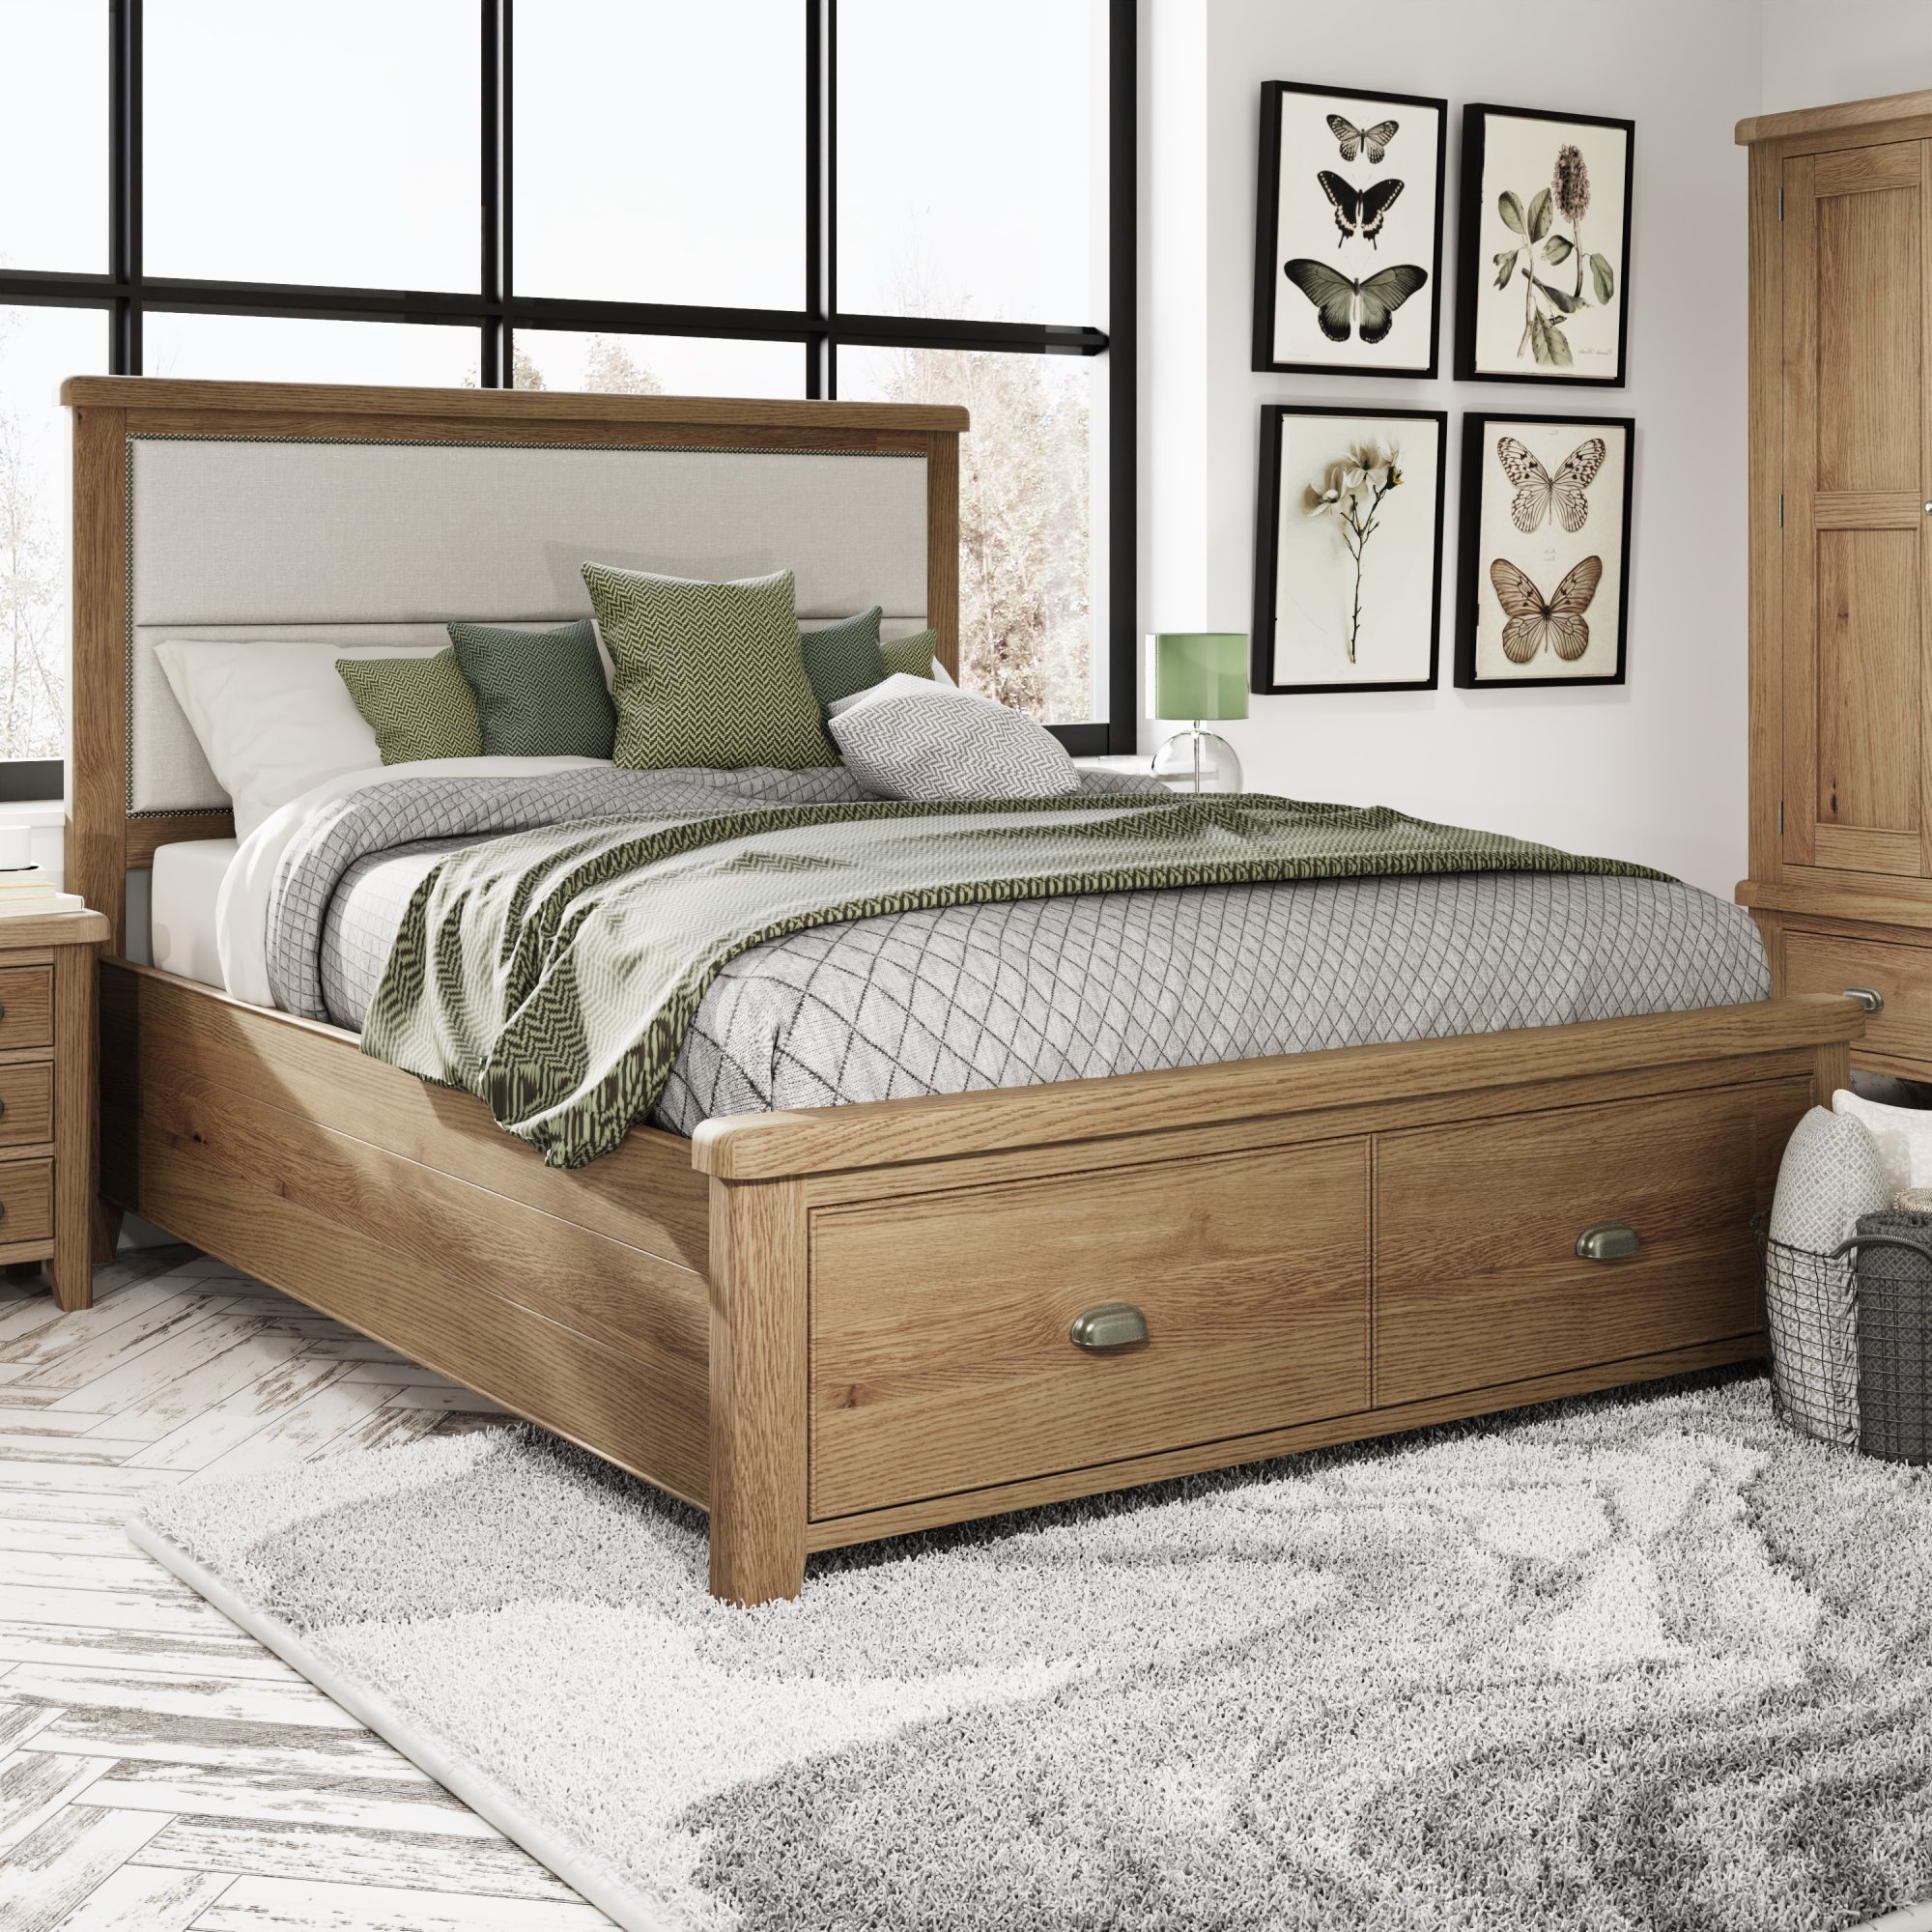 Heritage King Bed Frame And Headboard Aldiss Furniture